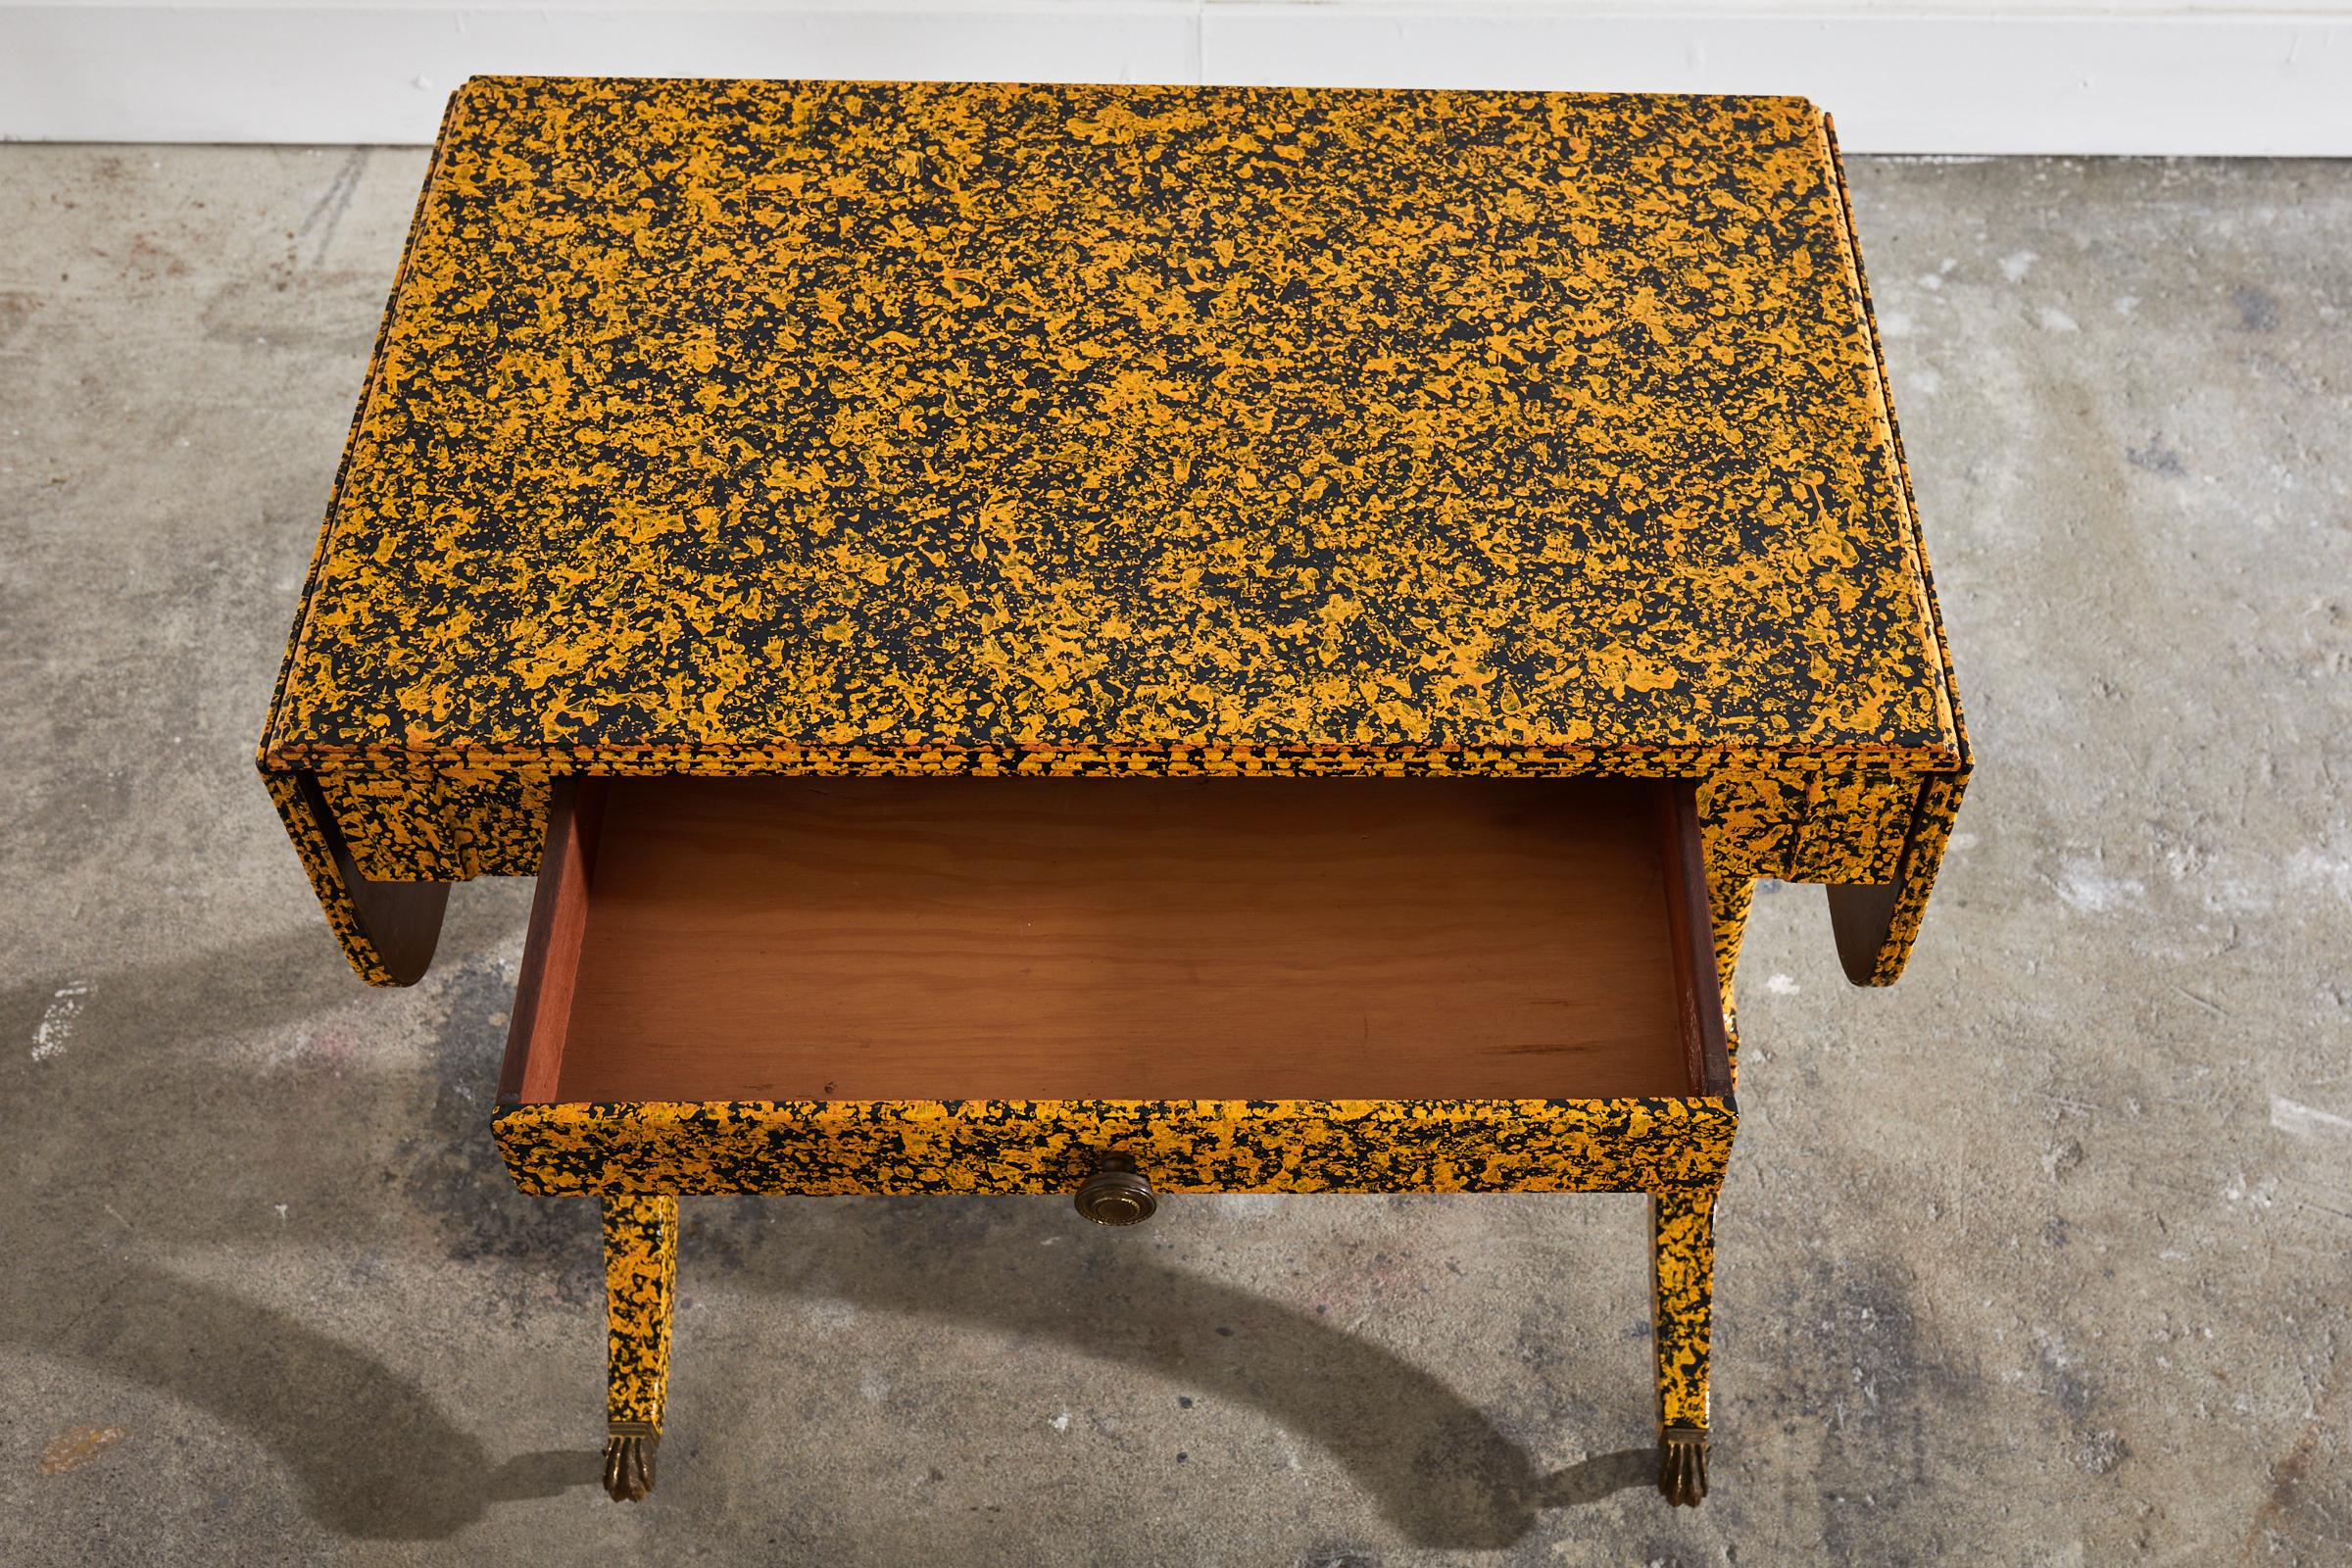 19th Century English Regency Style Writing Table Speckled by Ira Yeager For Sale 2